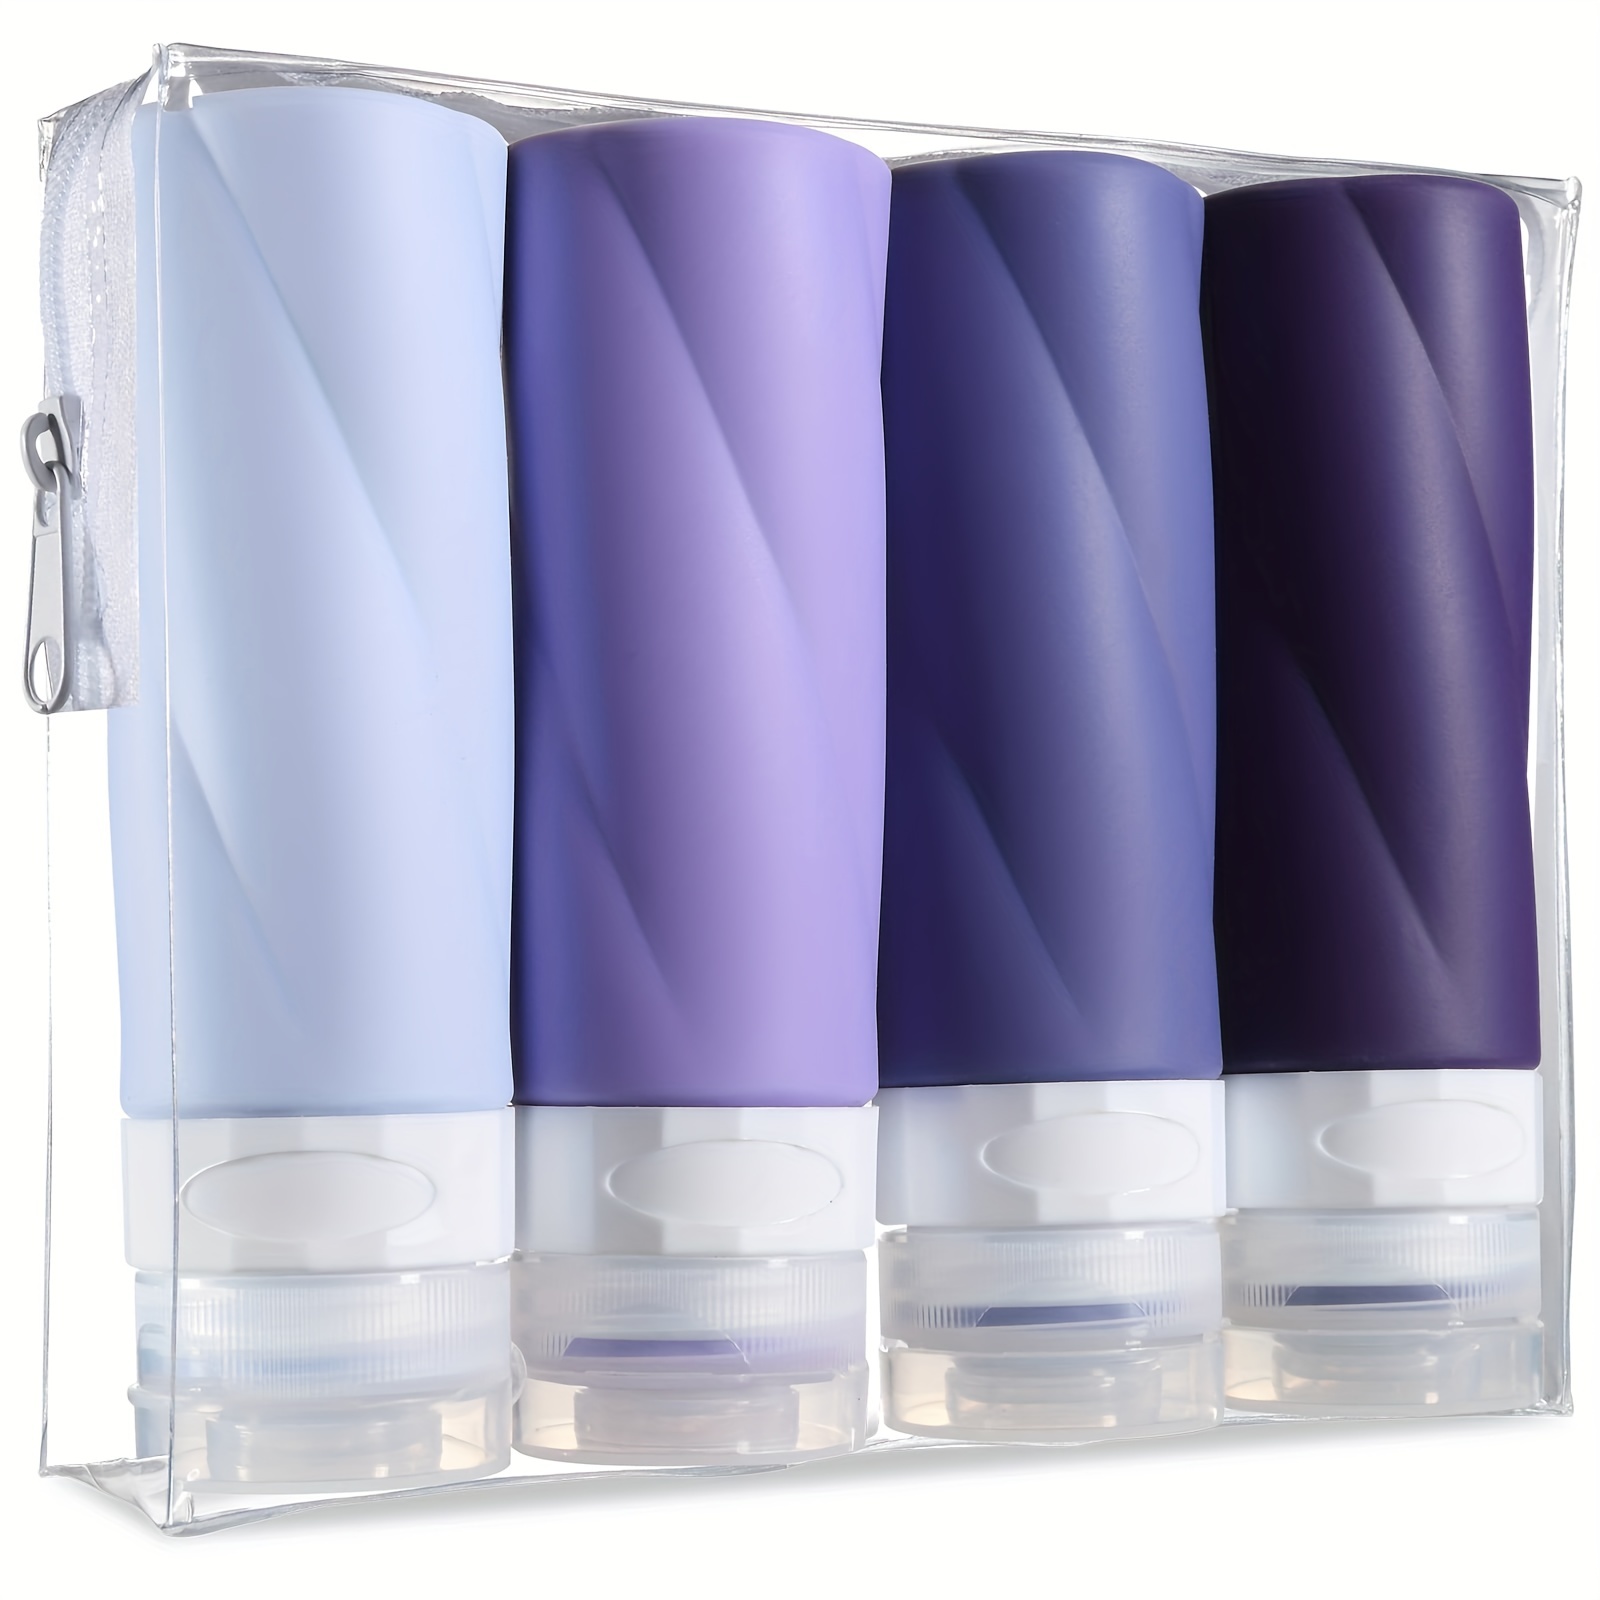 

4pcs Tsa Approved Travel Bottles - 3oz Leak Proof Refillable Toiletry Tubes With Clear Toiletry Bag - Perfect For On-the-go Beauty And Hygiene Needs